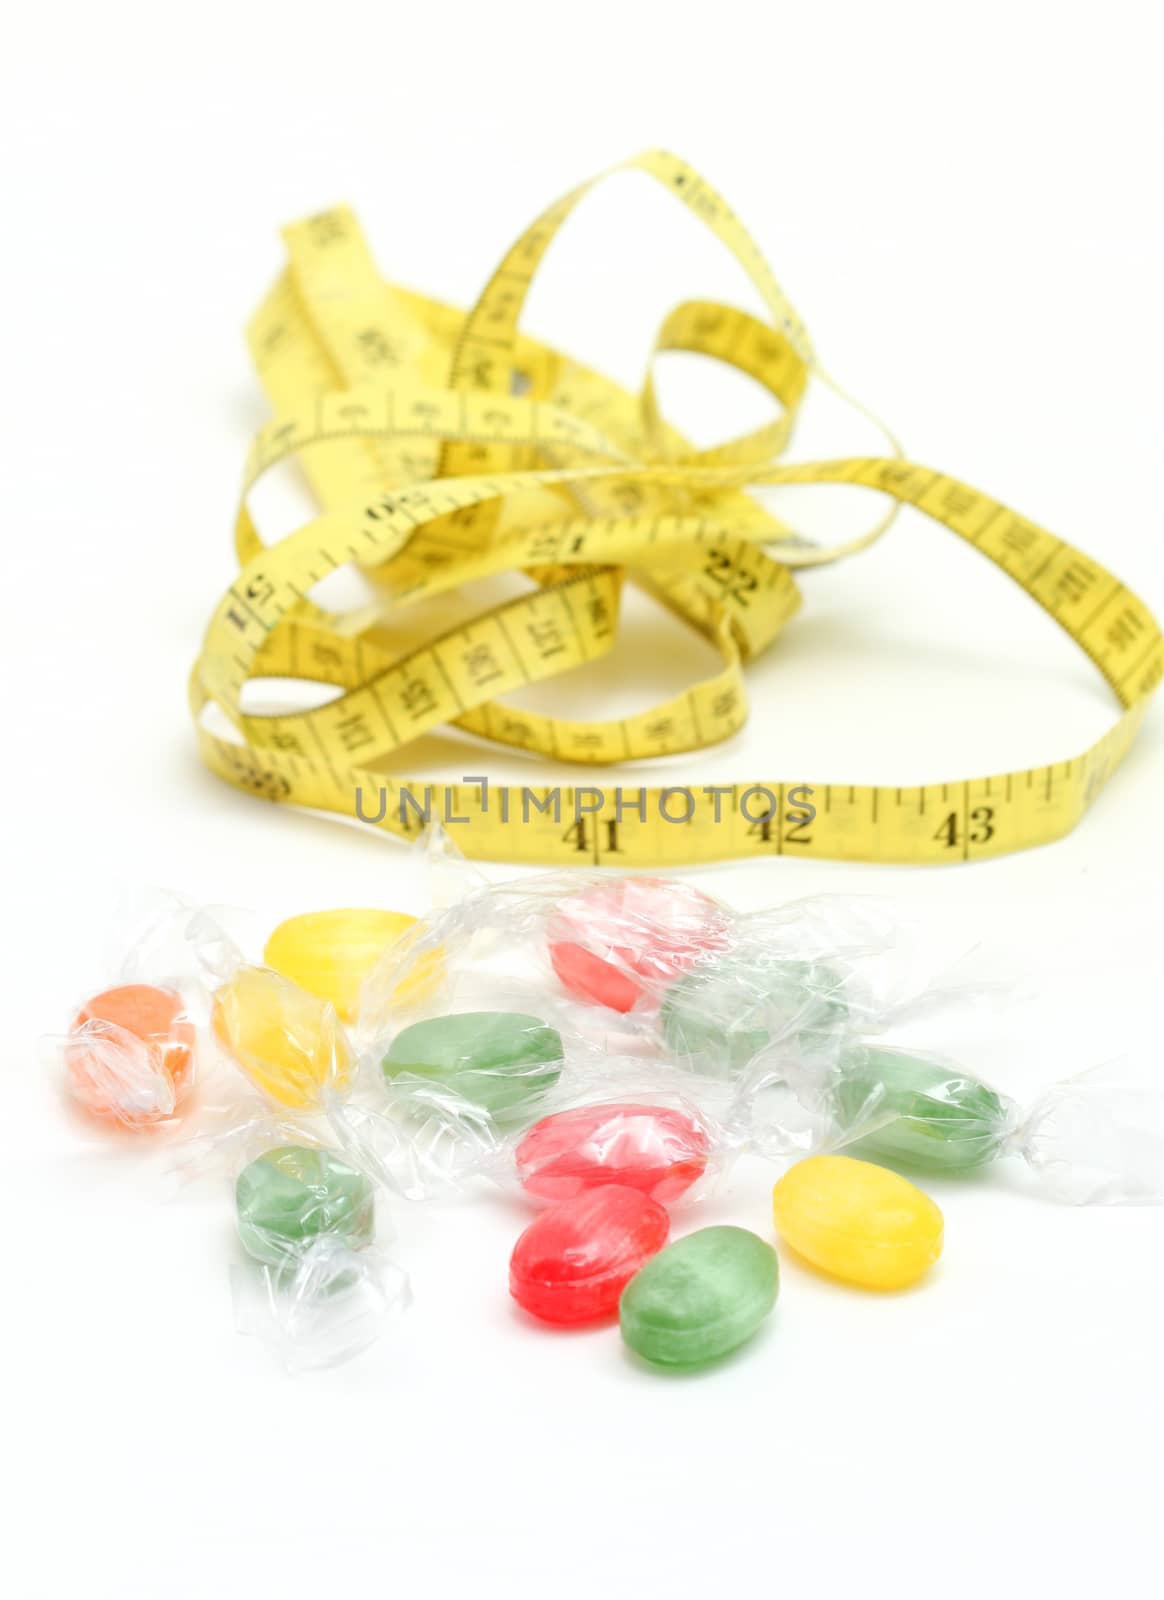 picture of a the colored fruit taste candies. and tape measure .sweet food concept